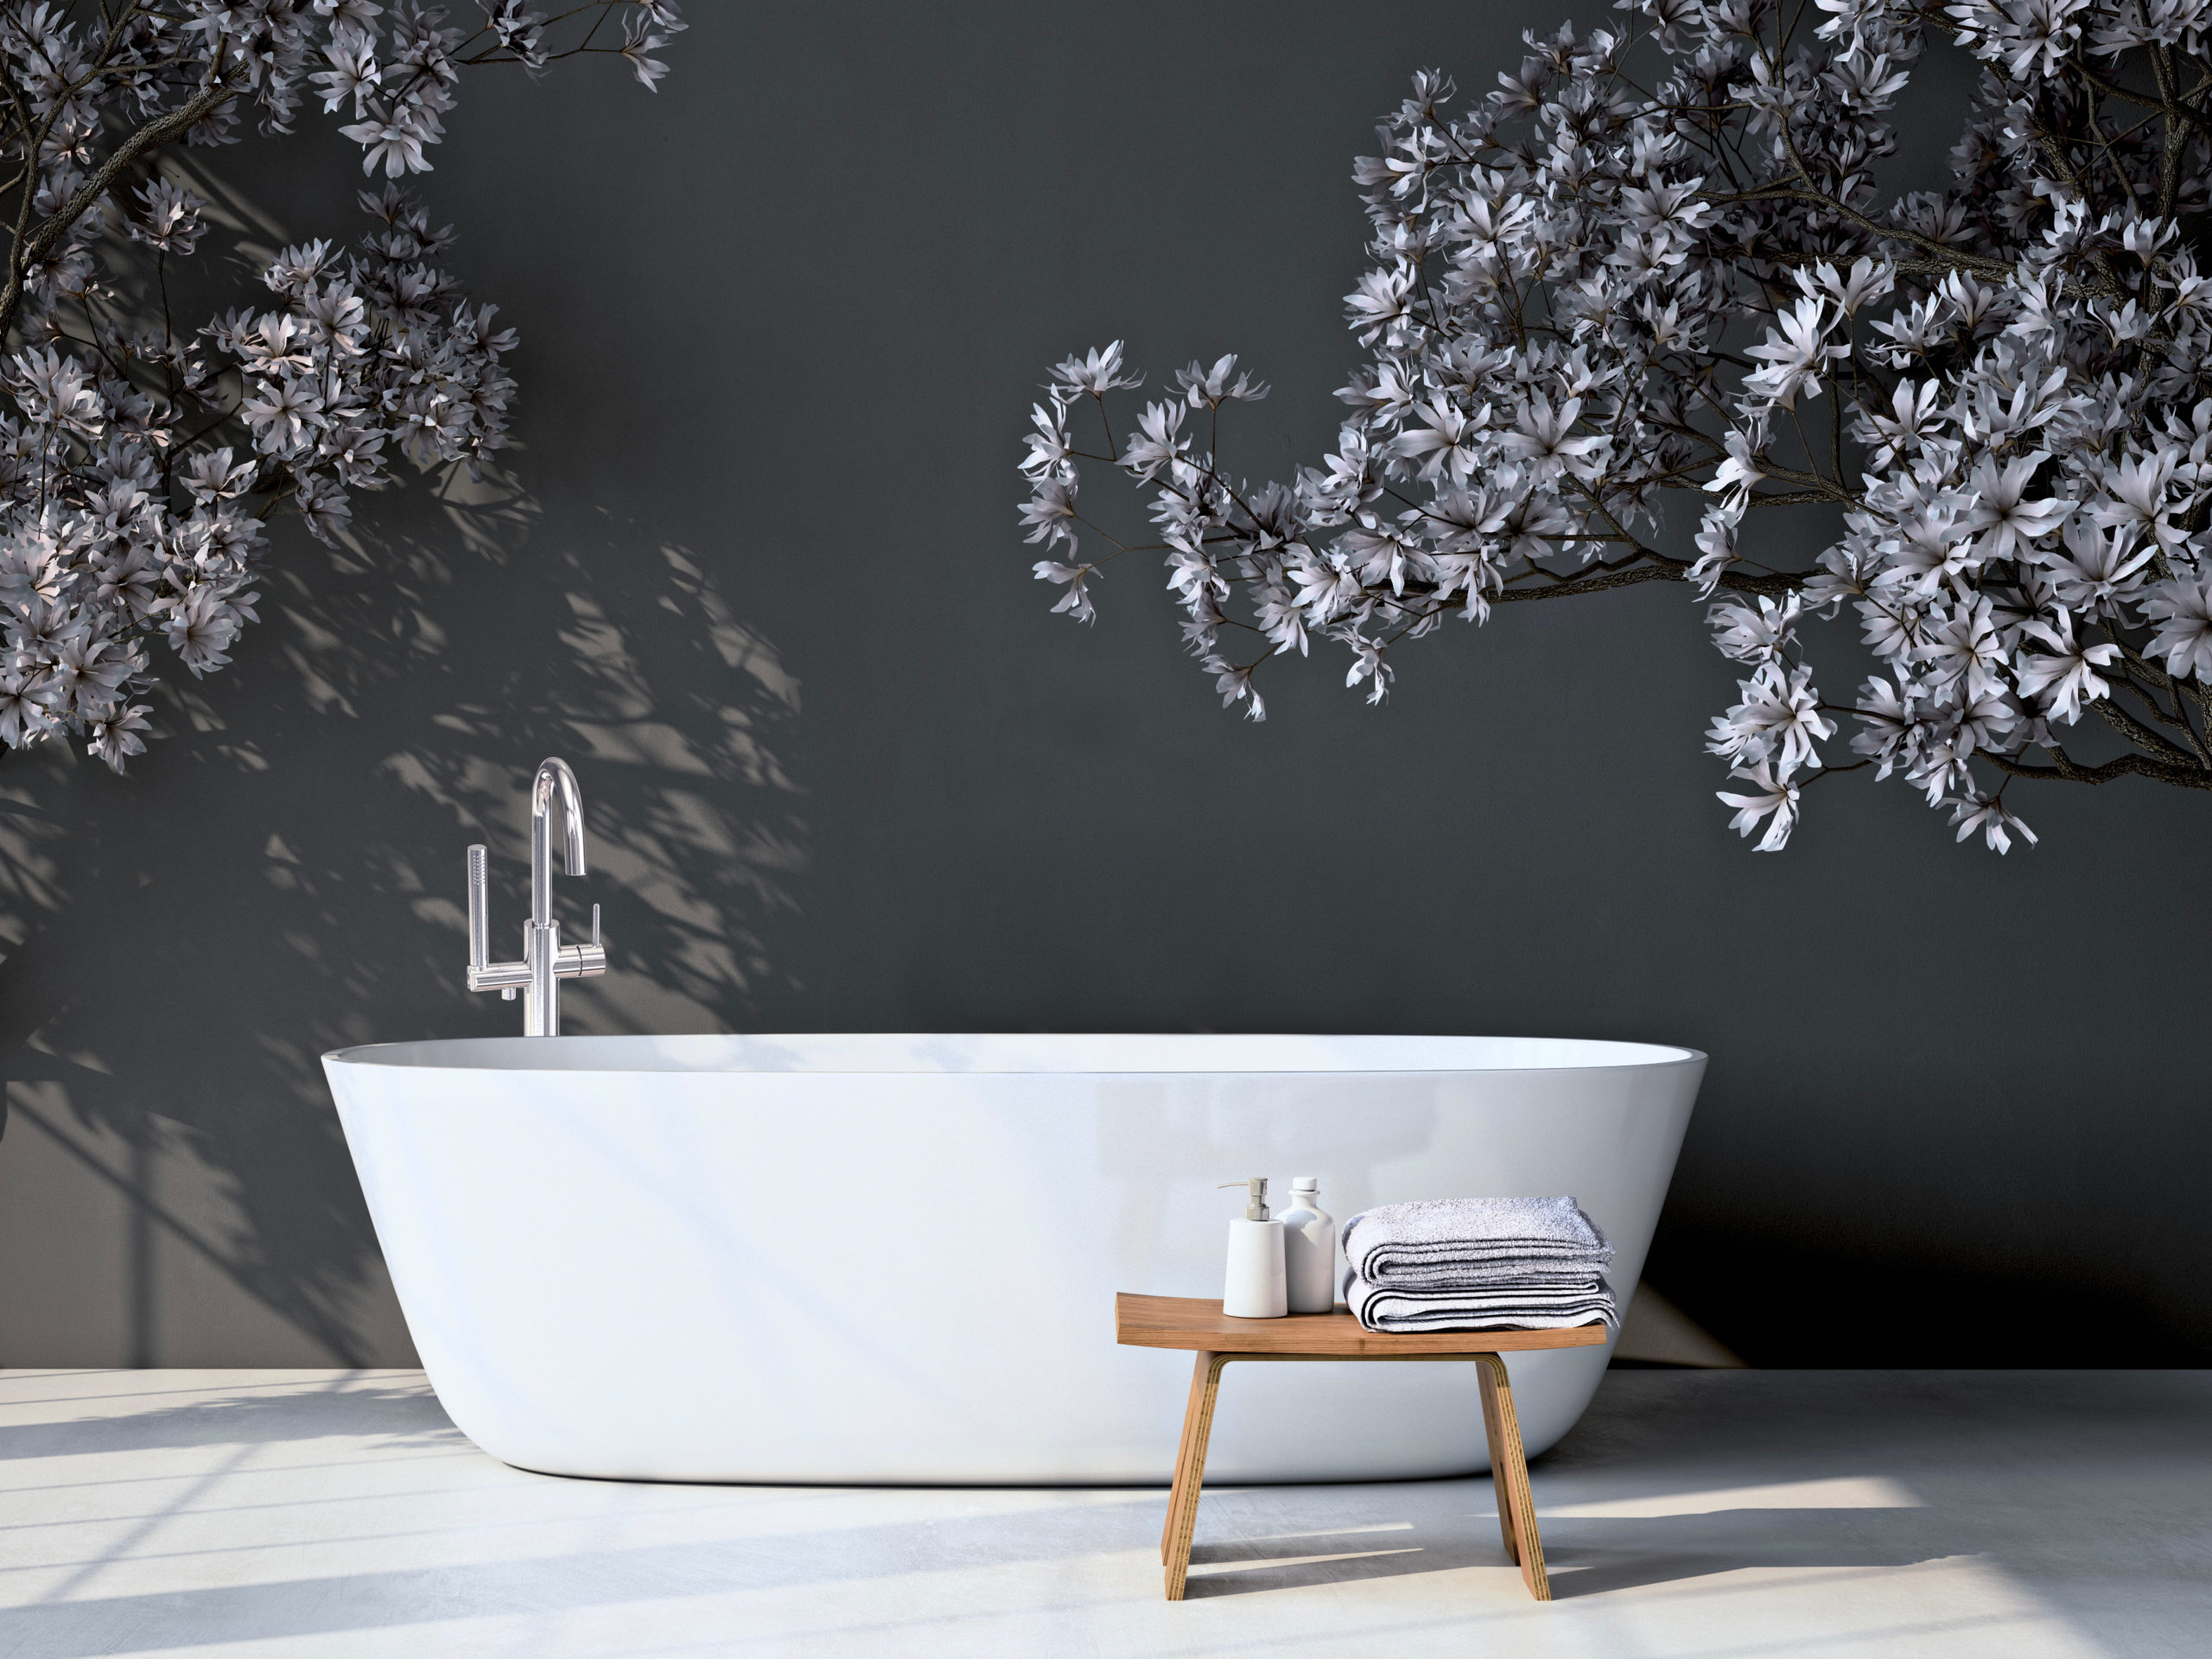 This bathroom has a white, freestanding tub with a silver faucet. There are trees featured in the space while a wooden stool is in front of the tub holding towels and bottles.